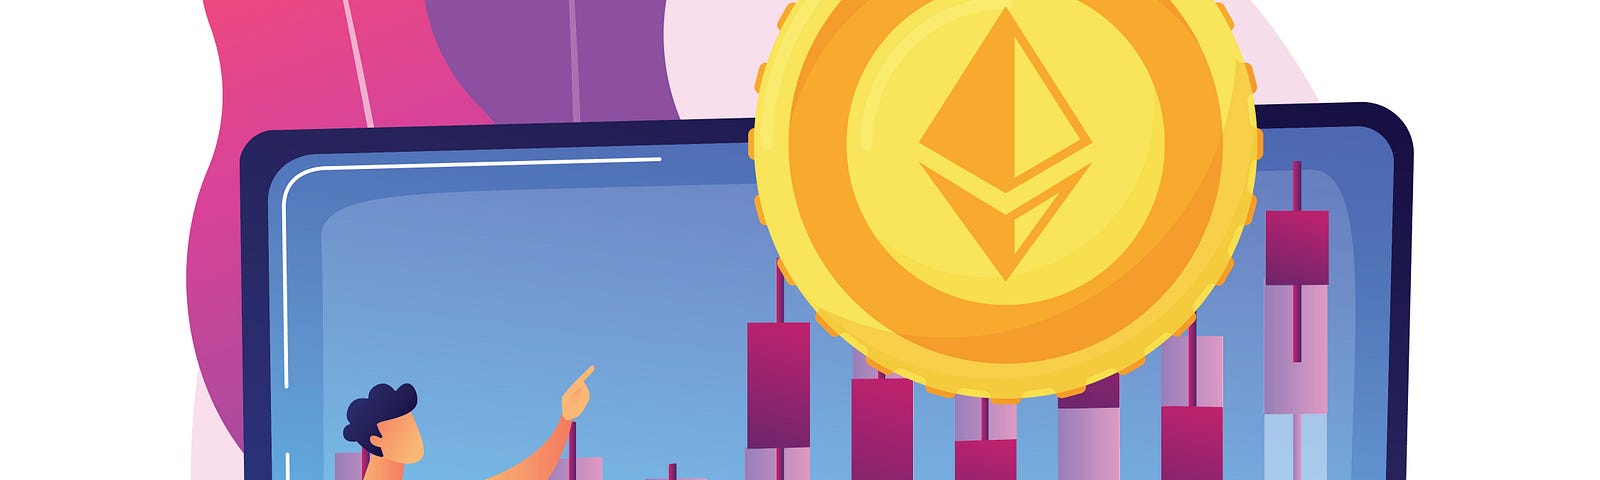 What to expect with Ethereum 2.0?